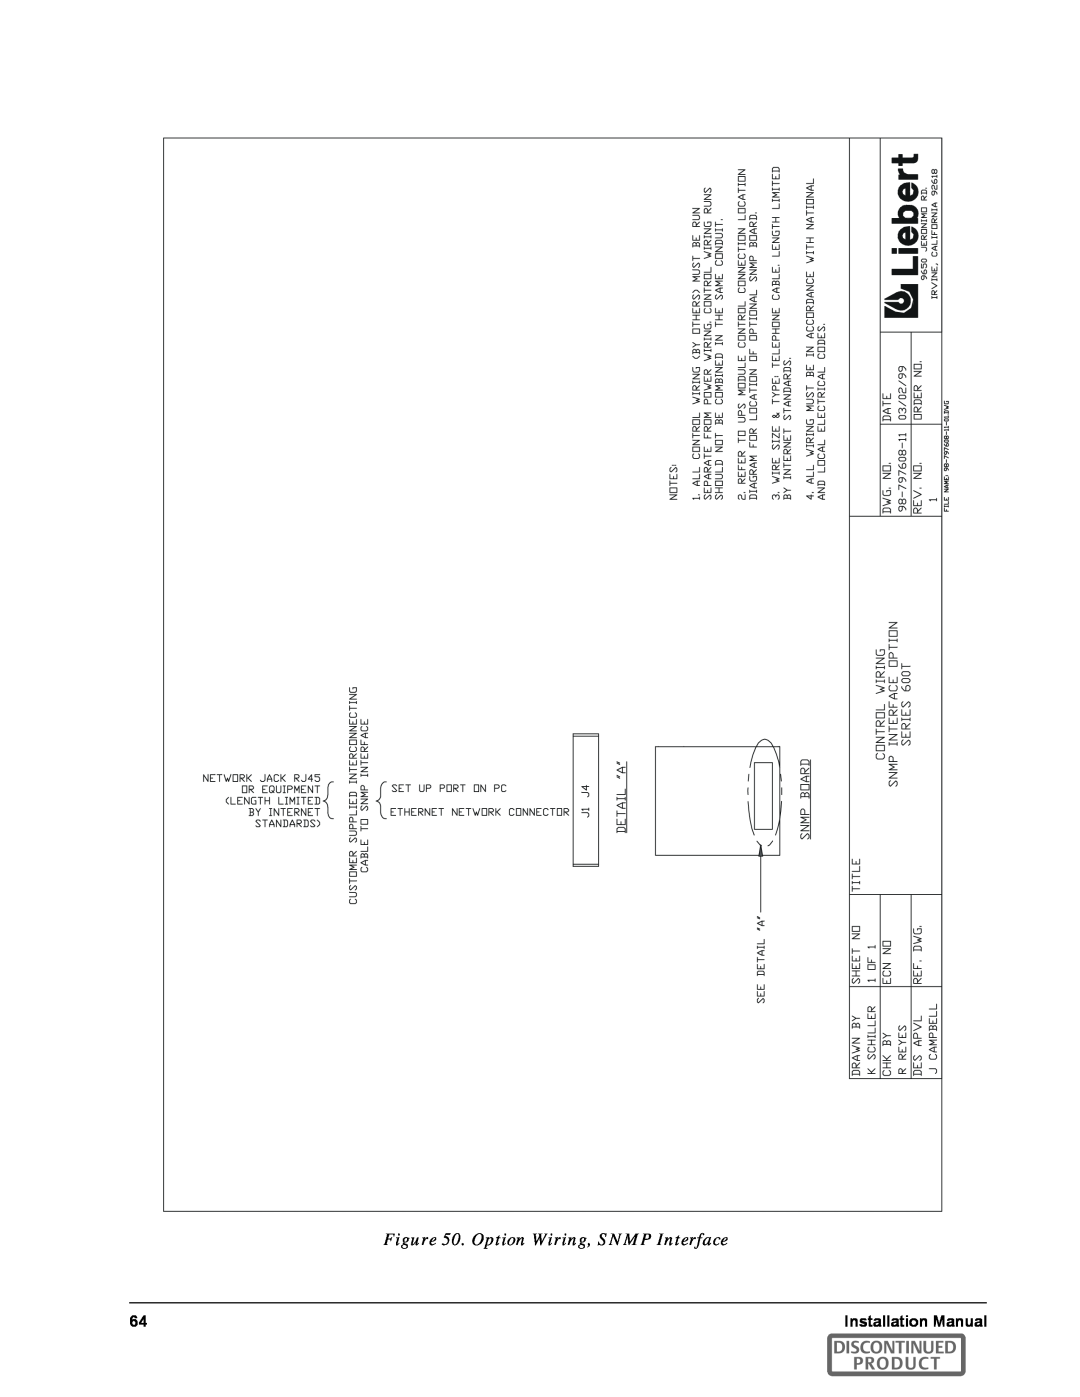 Emerson SERIES 600T manual Option Wiring, SNMP Interface, Discontinued Product 